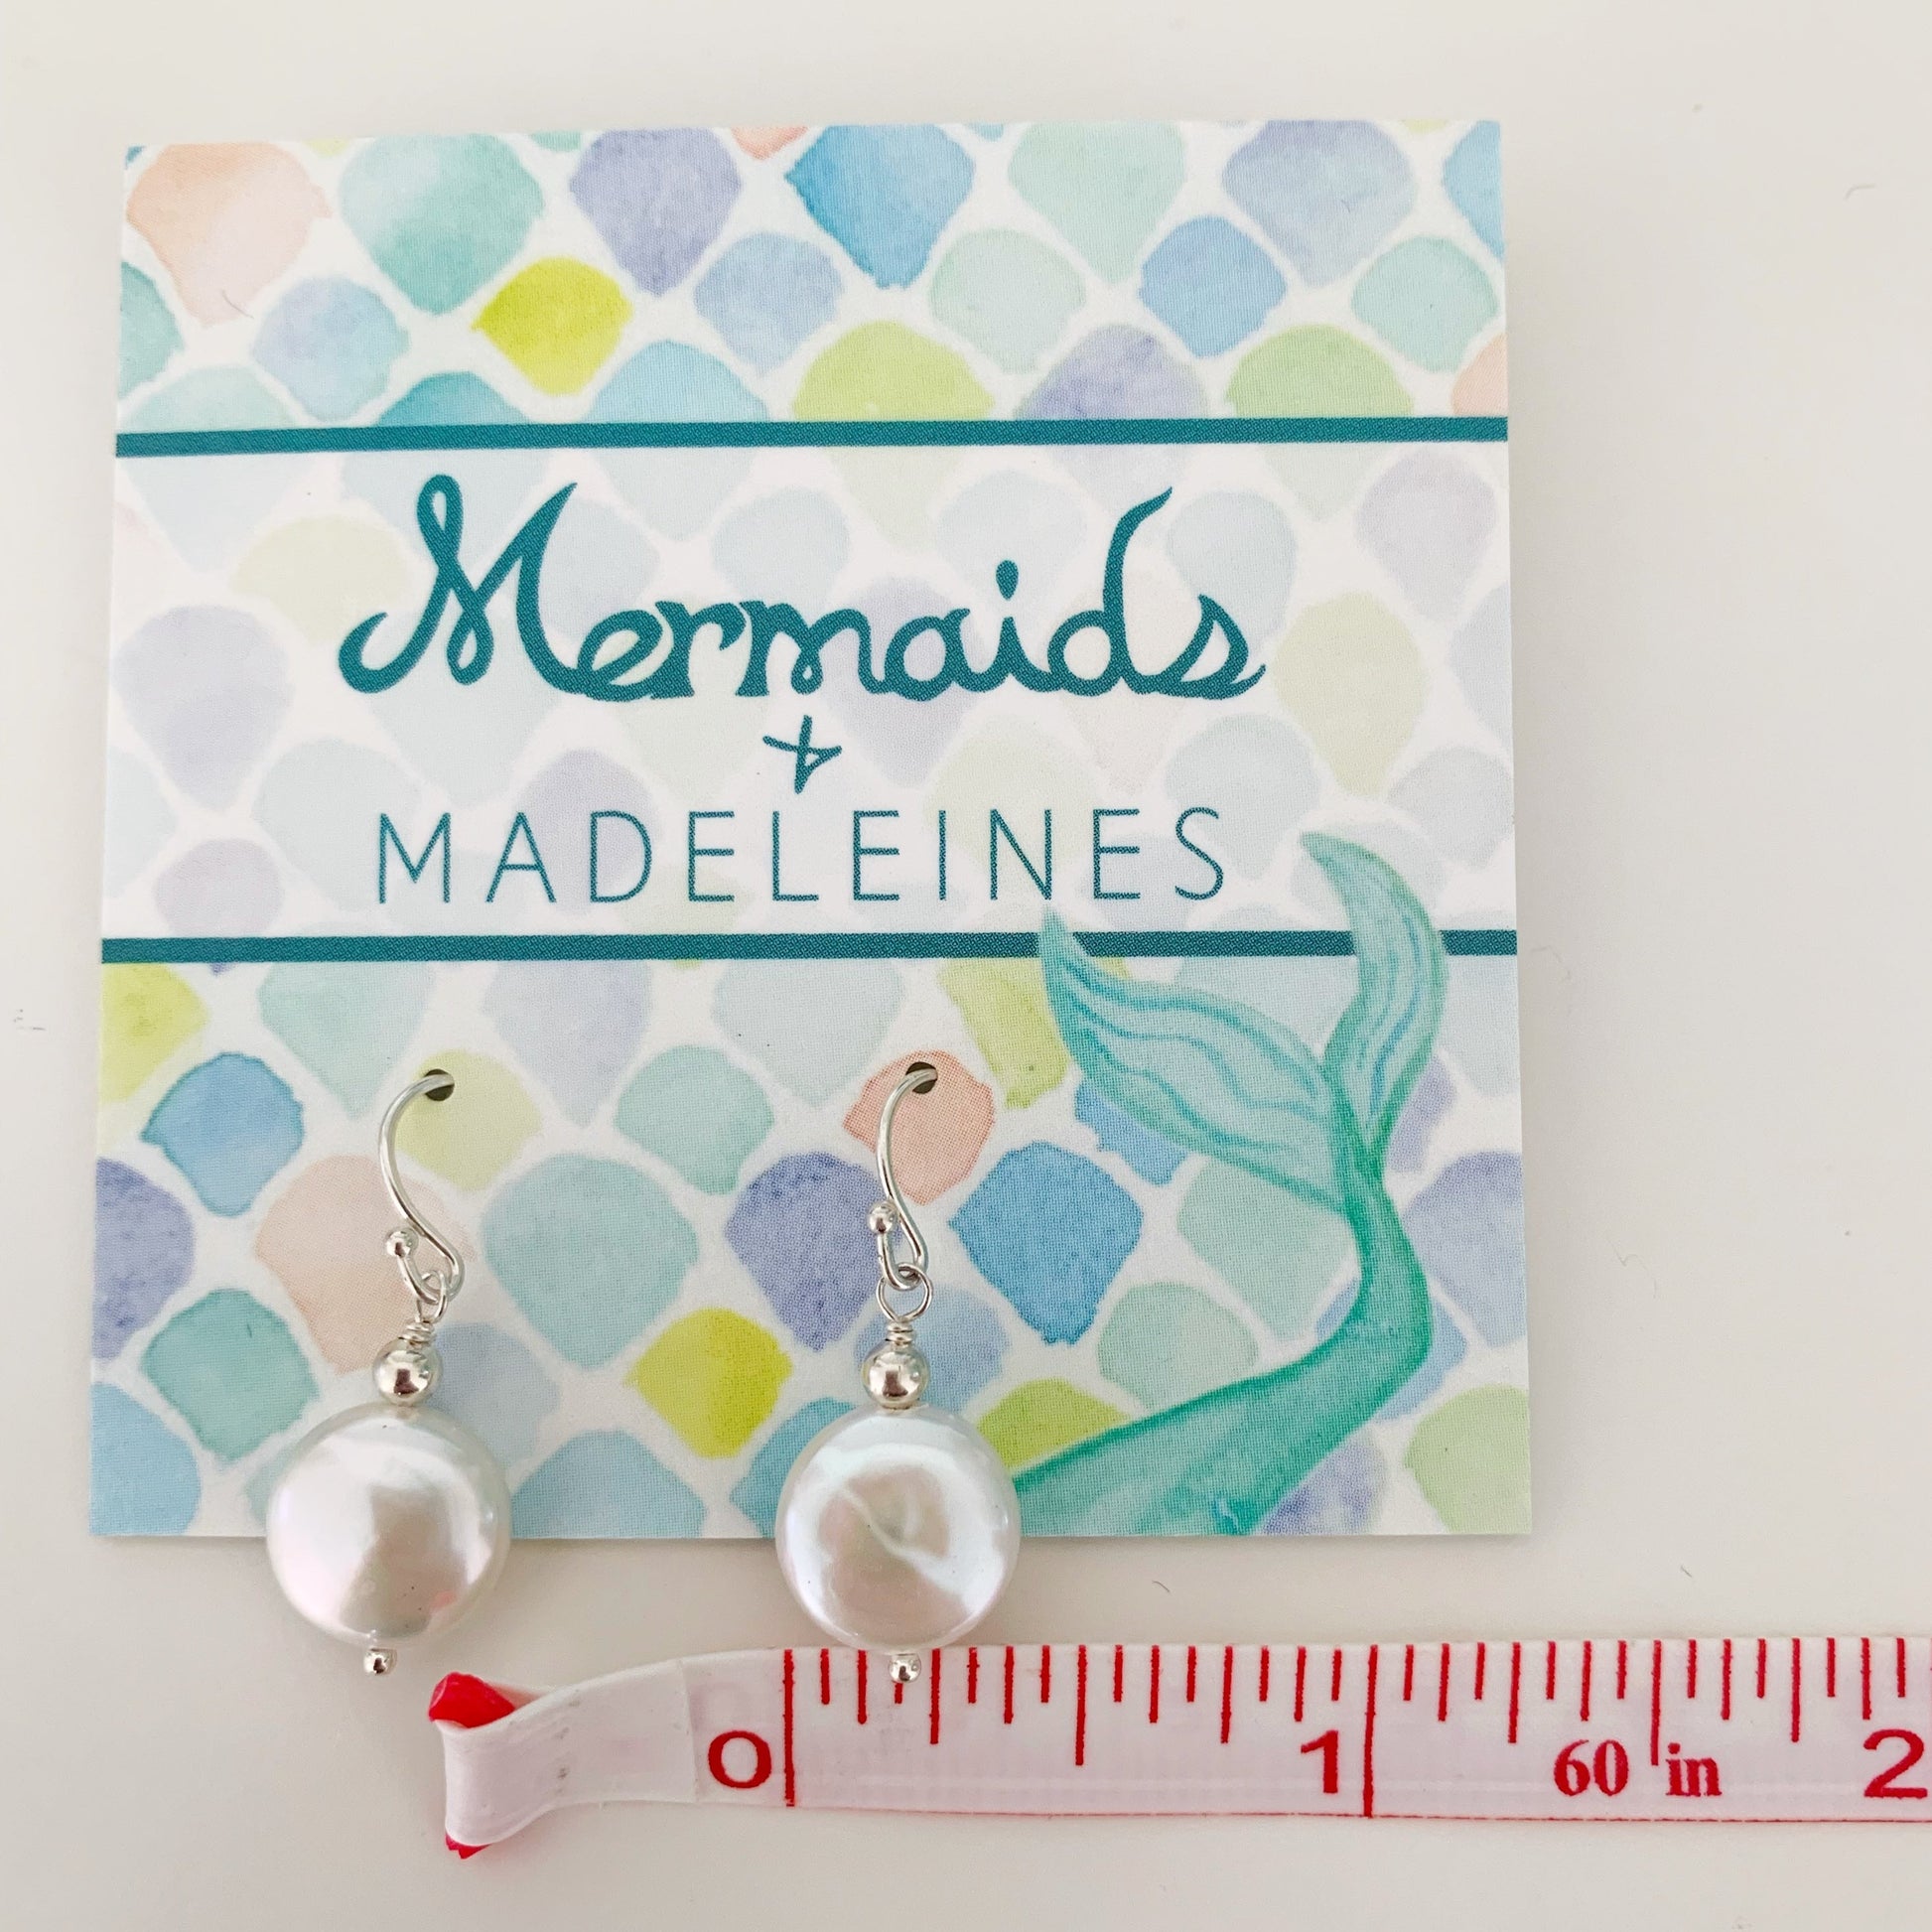 the newport earrings by mermaids and madeleines are freshwater coin pearl drops with sterling silver beads and findings. this pair is hanging on an earring card with a measuring tape near the pearl to show the pearl diameter of about 3/8". everything is photographed on a white surface